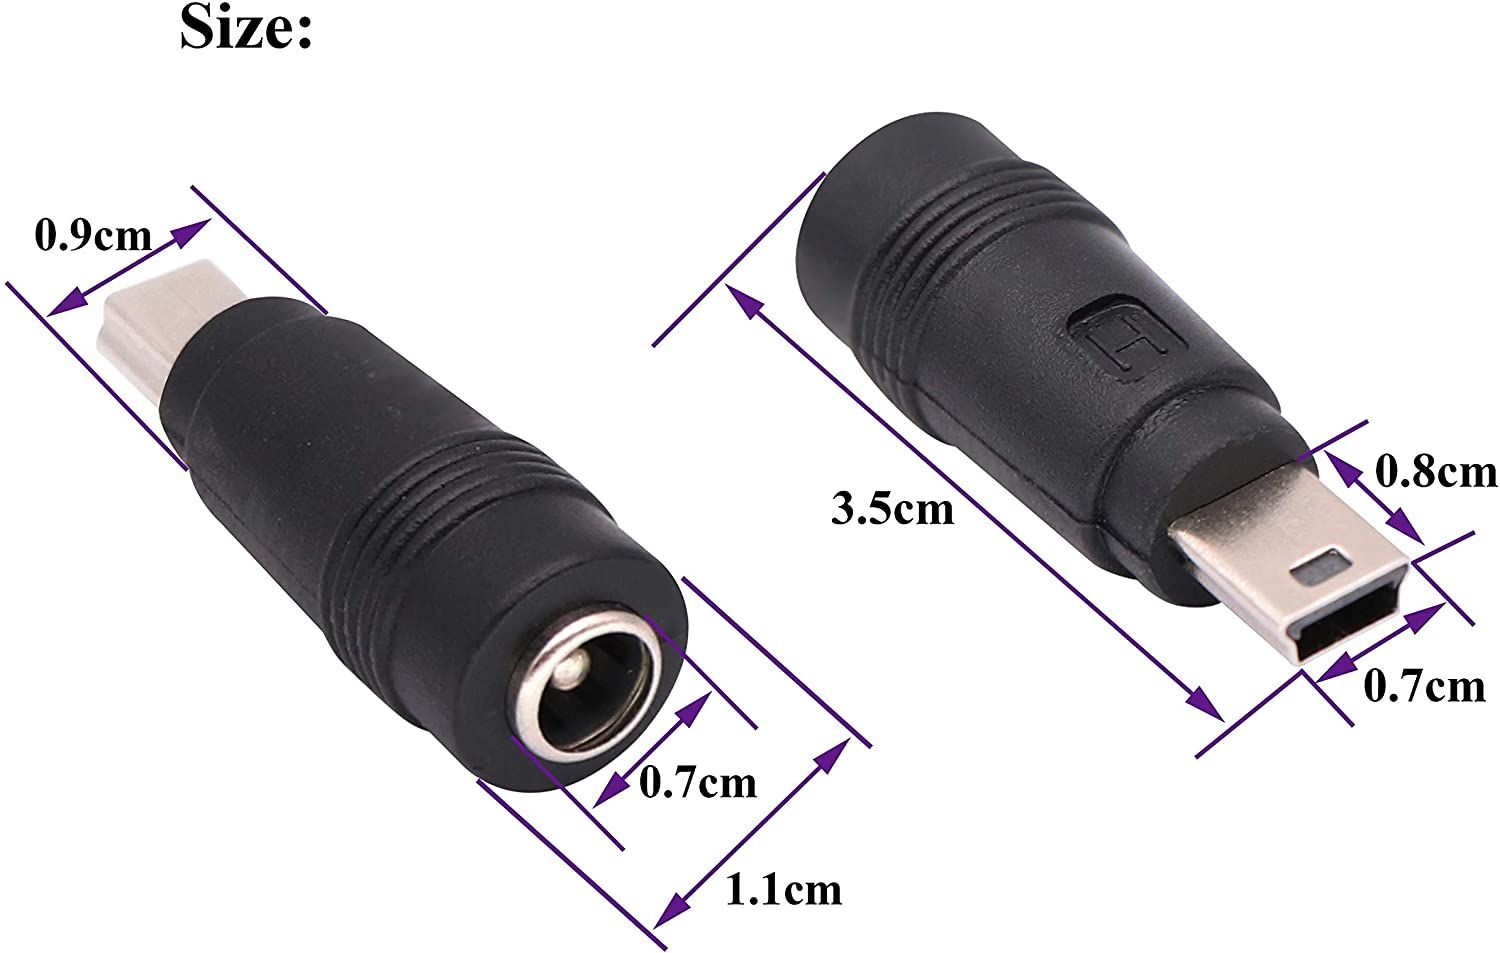 USB 2.0 A Male to DC 5.5x2.1mm 5V DC Plug Connector Charge Jack